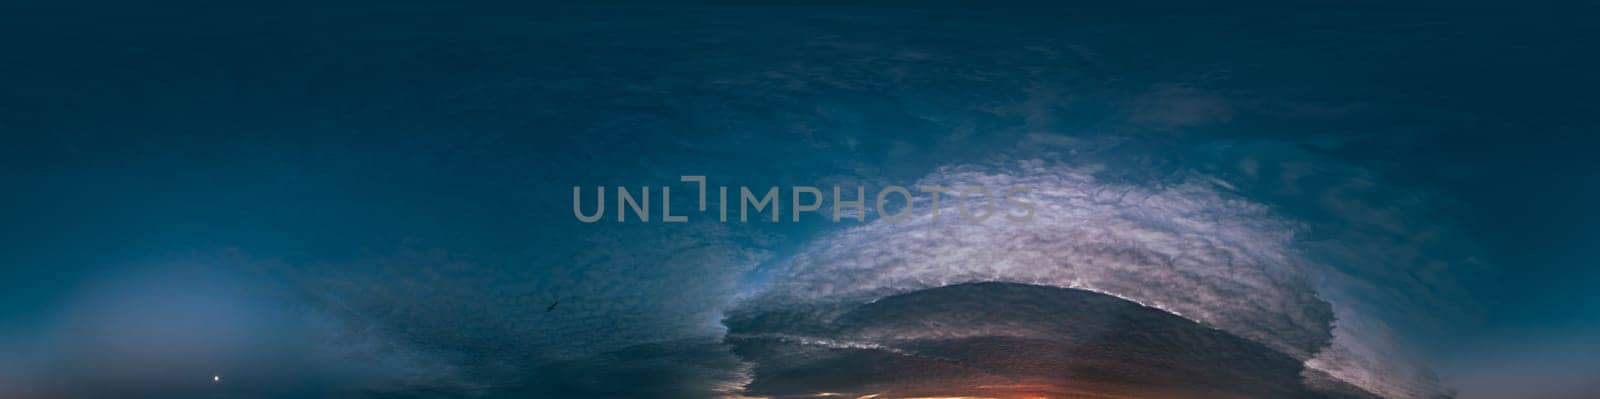 360 panorama of glowing sunset sky with bright pink Cumulus clouds. HDR 360 seamless spherical panorama. Full zenith or sky dome sky replacement for aerial drone panoramas. Climate and weather change. by Matiunina